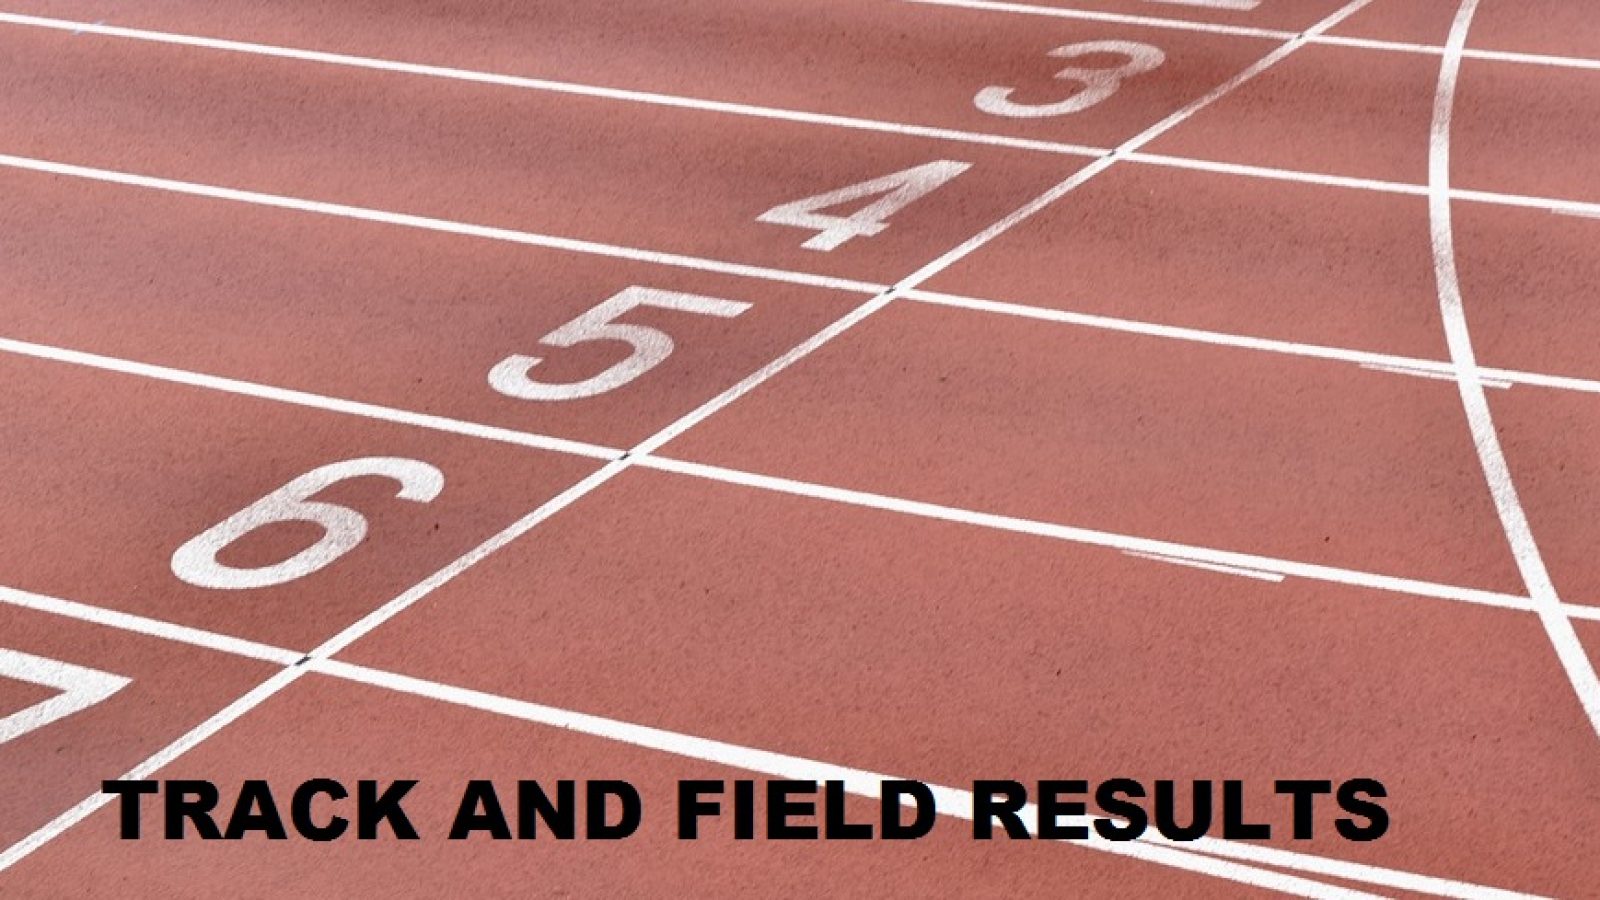 TRACK AND FIELD RESULTS